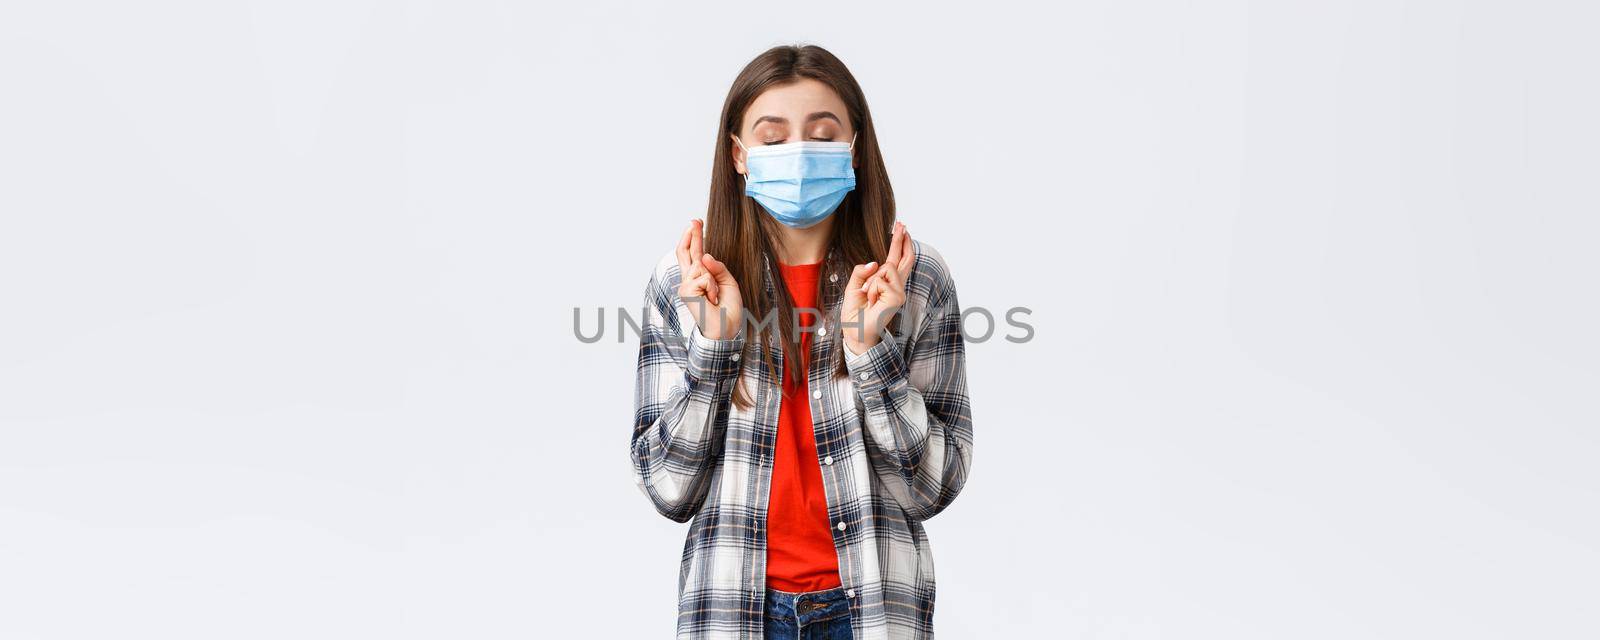 Coronavirus outbreak, leisure on quarantine, social distancing and emotions concept. Hopeful cute young woman in medical mask praying, close eyes and cross fingers good luck, making wish.